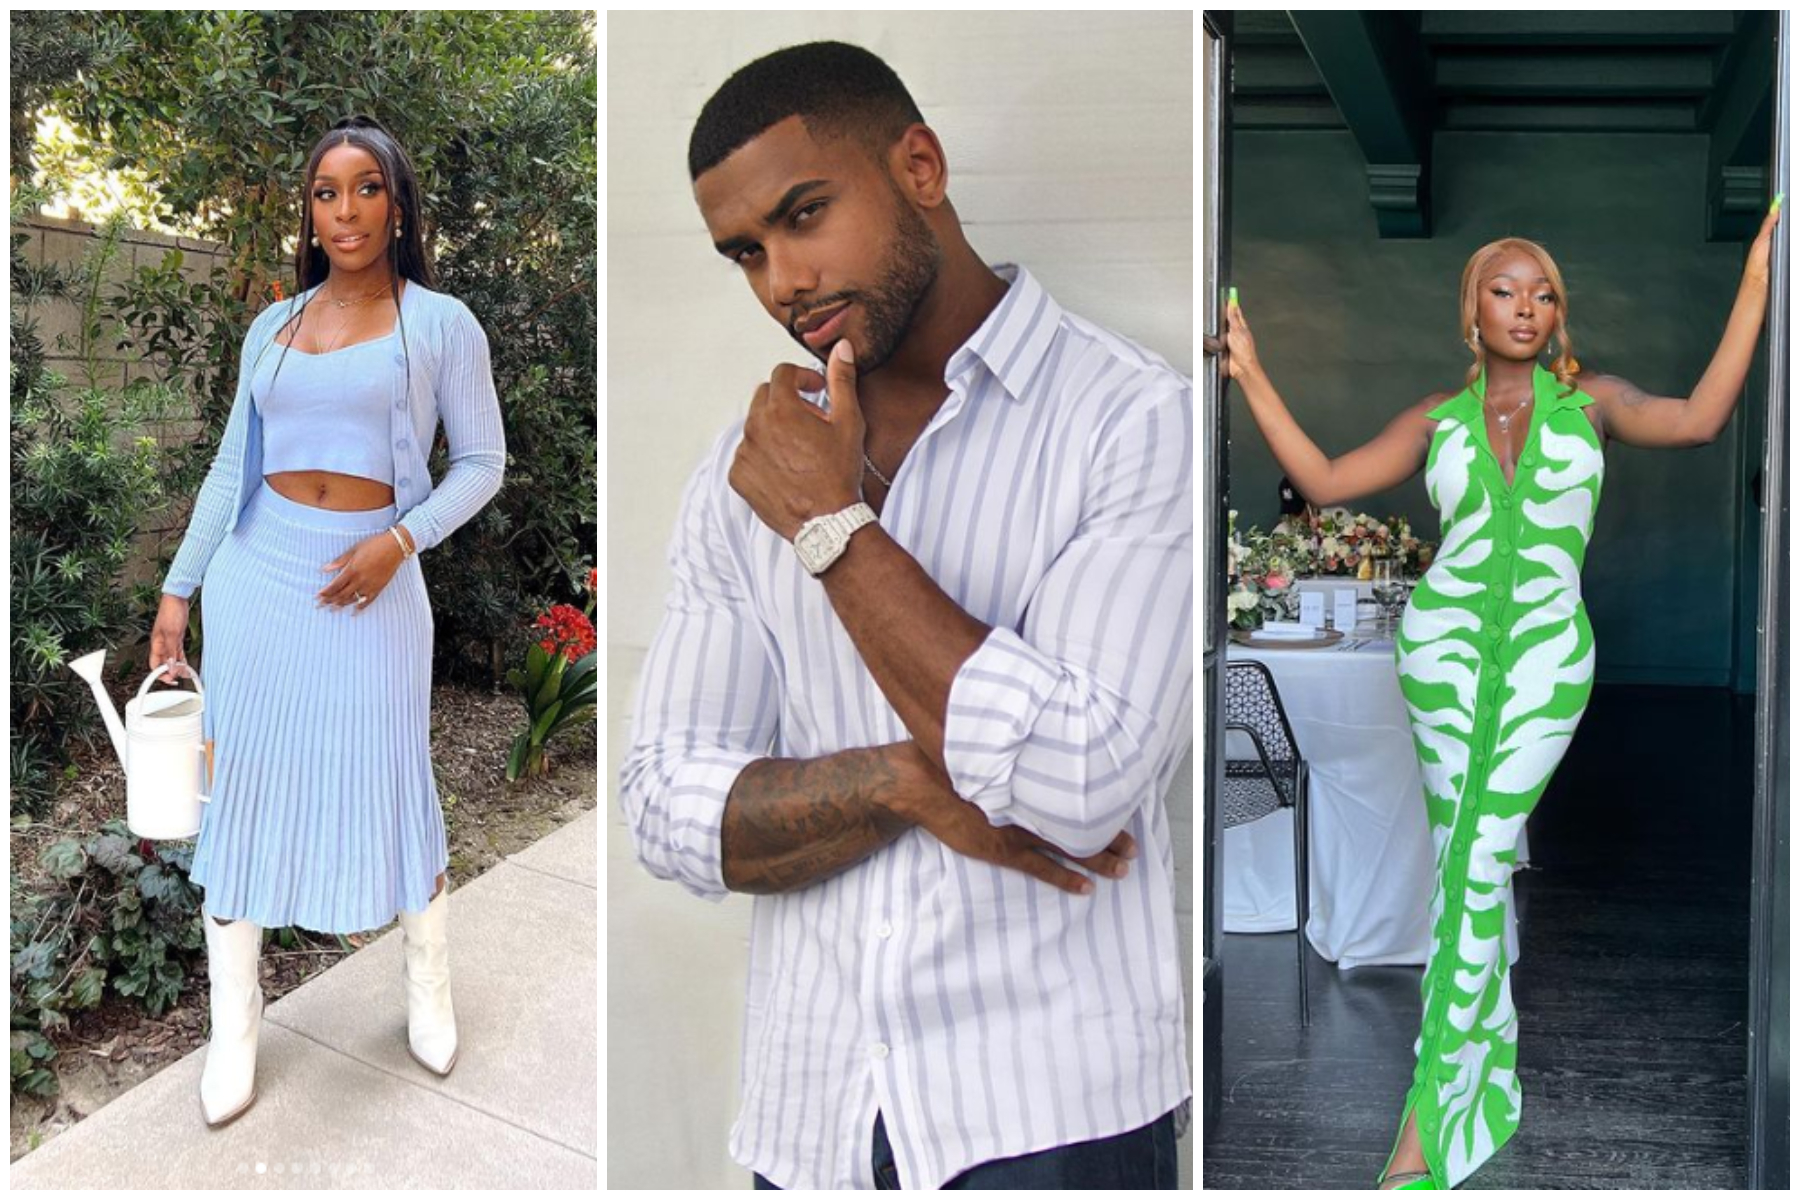 20 of the most popular black YouTubers you should follow right now